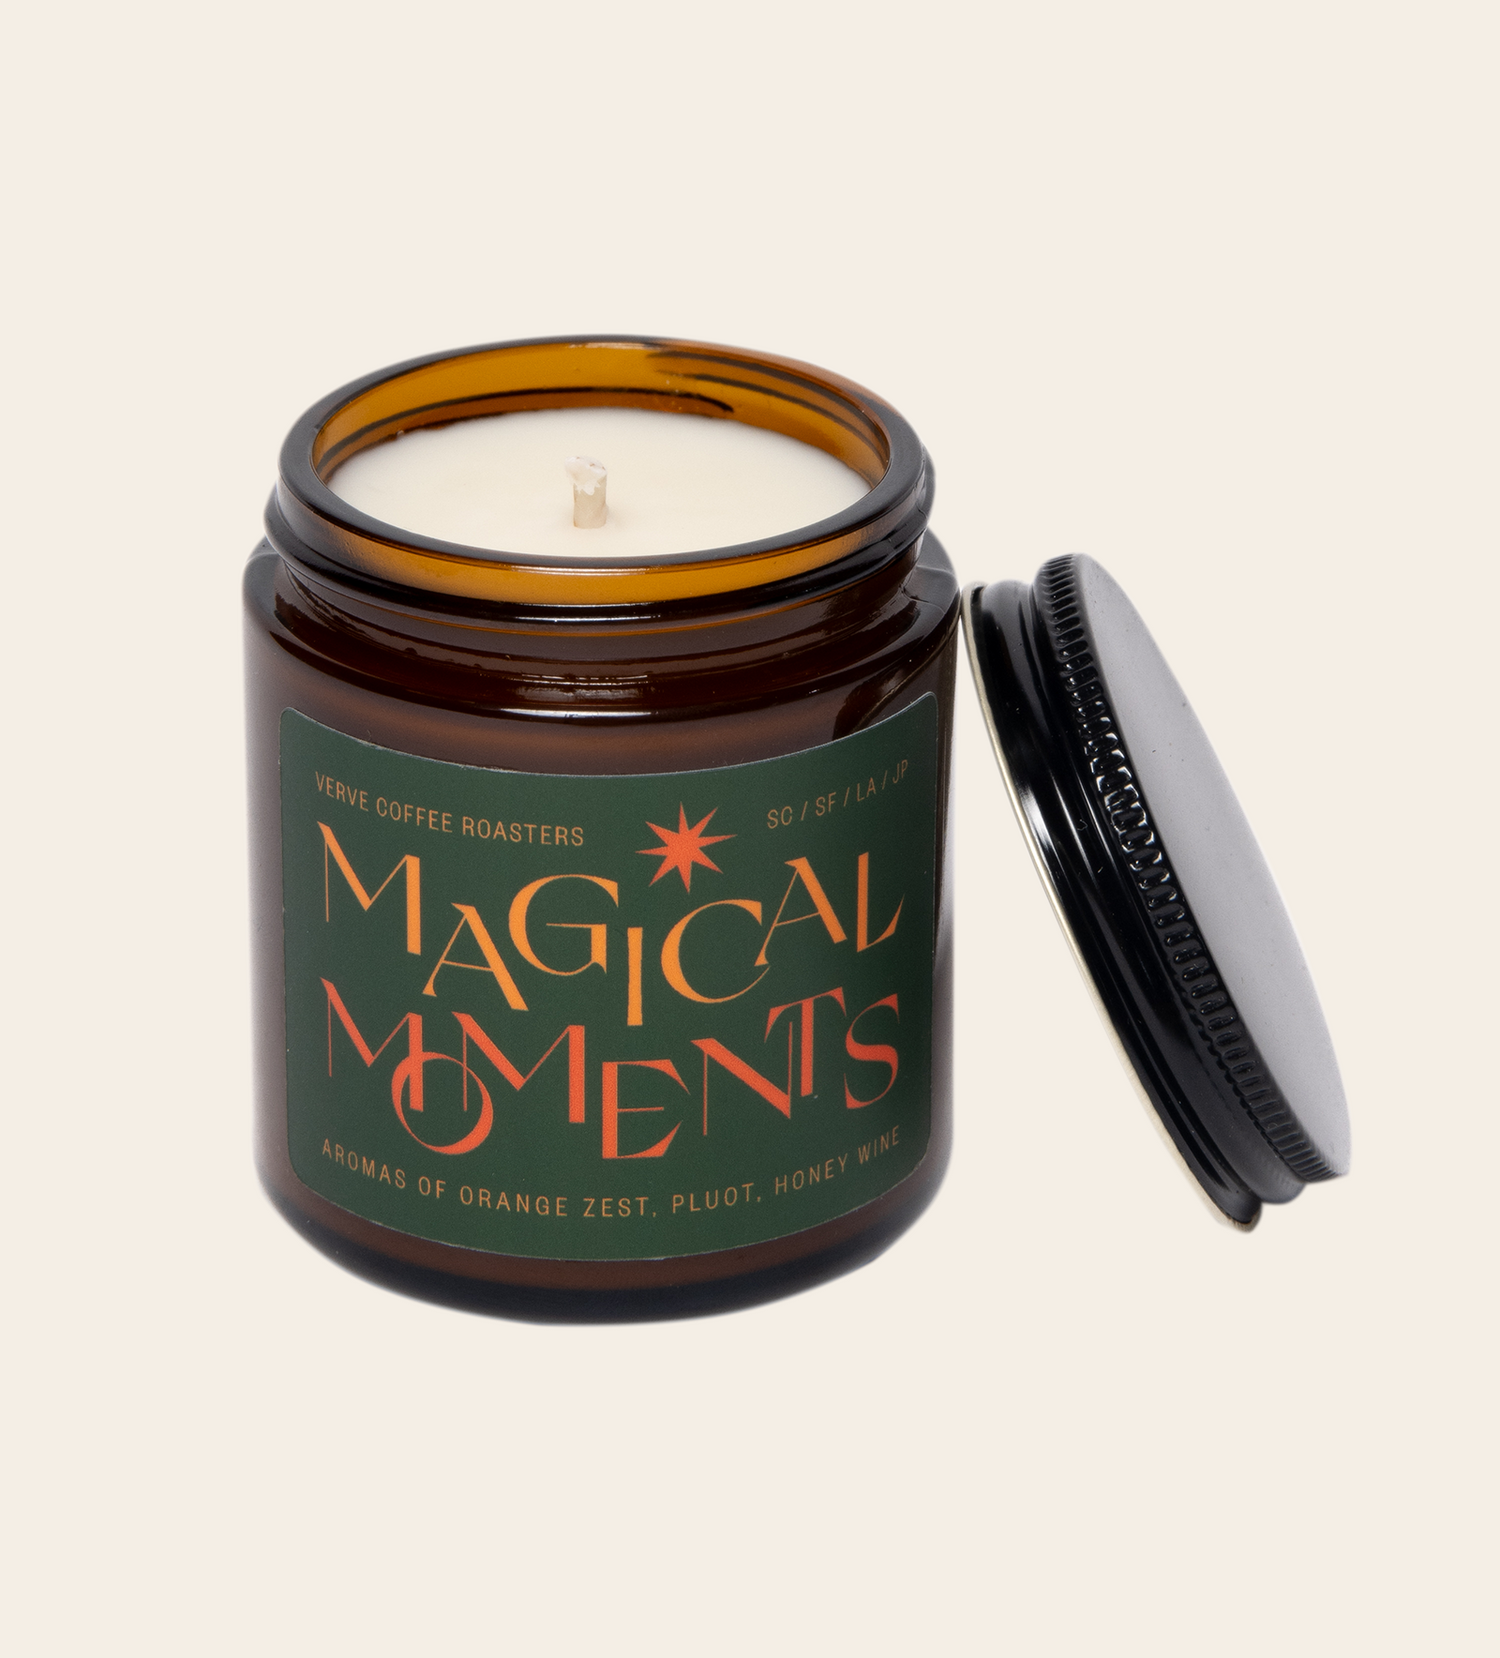 Magical moments candle open